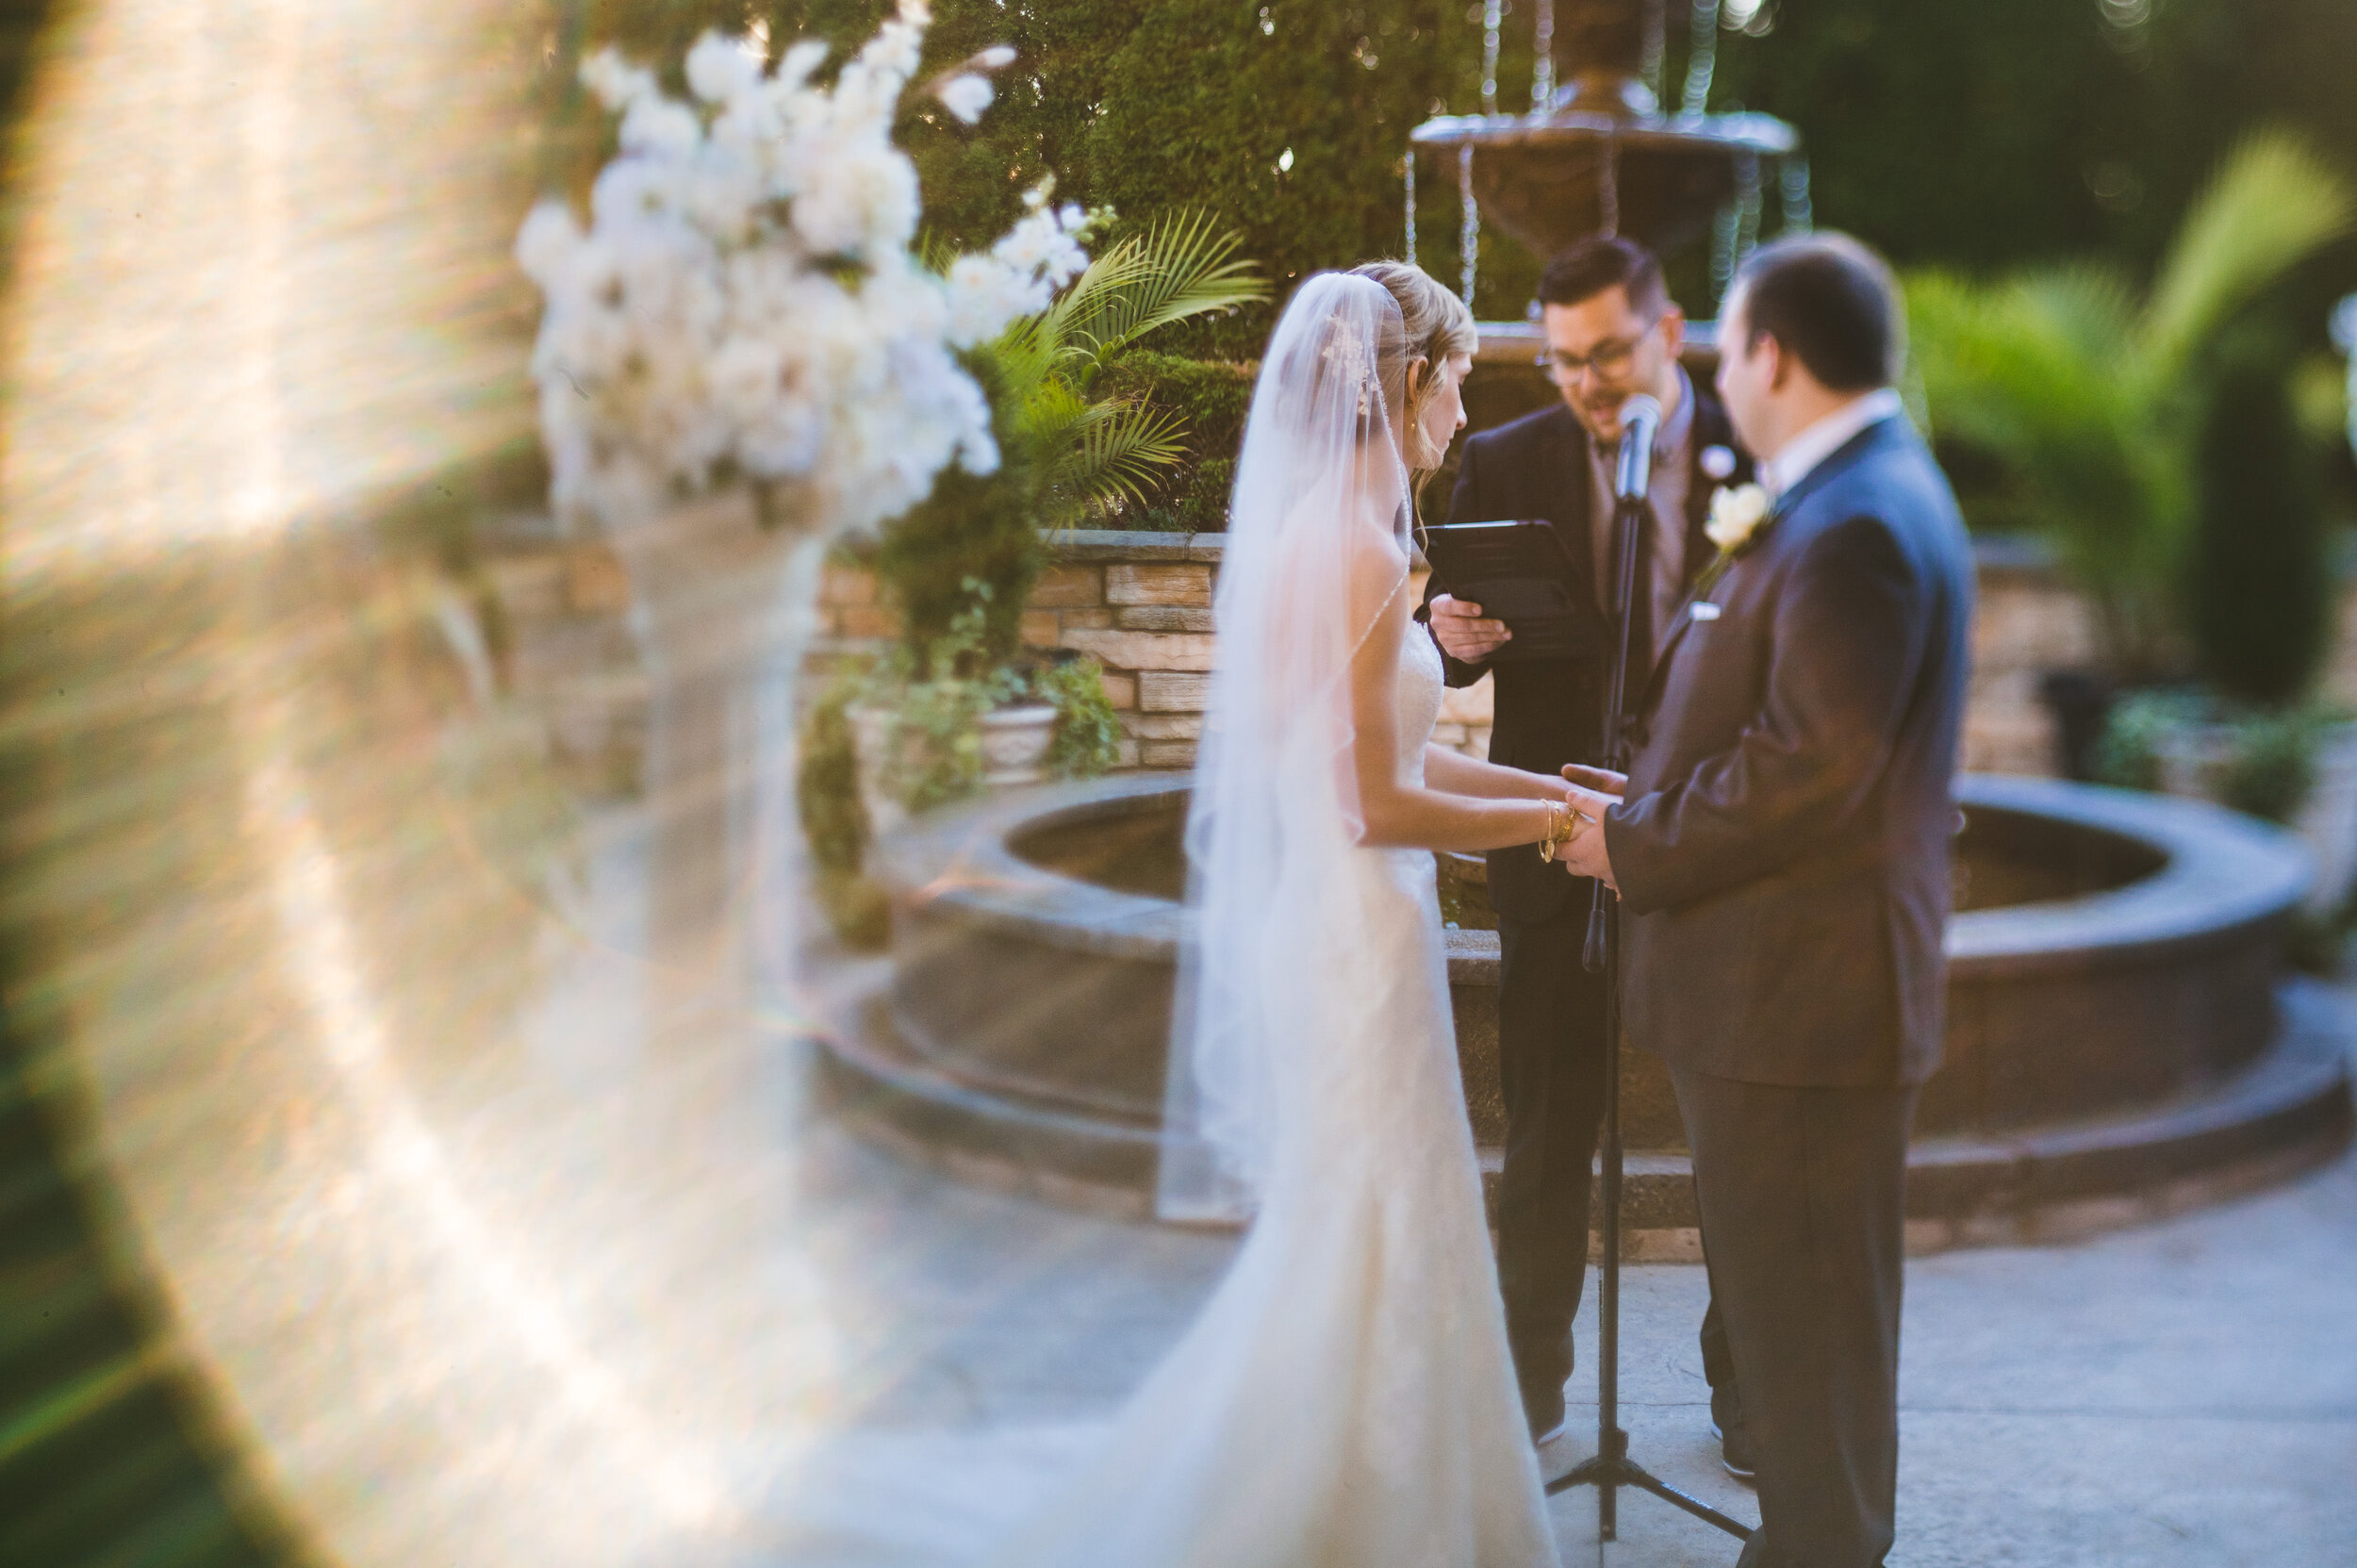 Wedding ceremony in Freehold New Jersey taken with a freelens